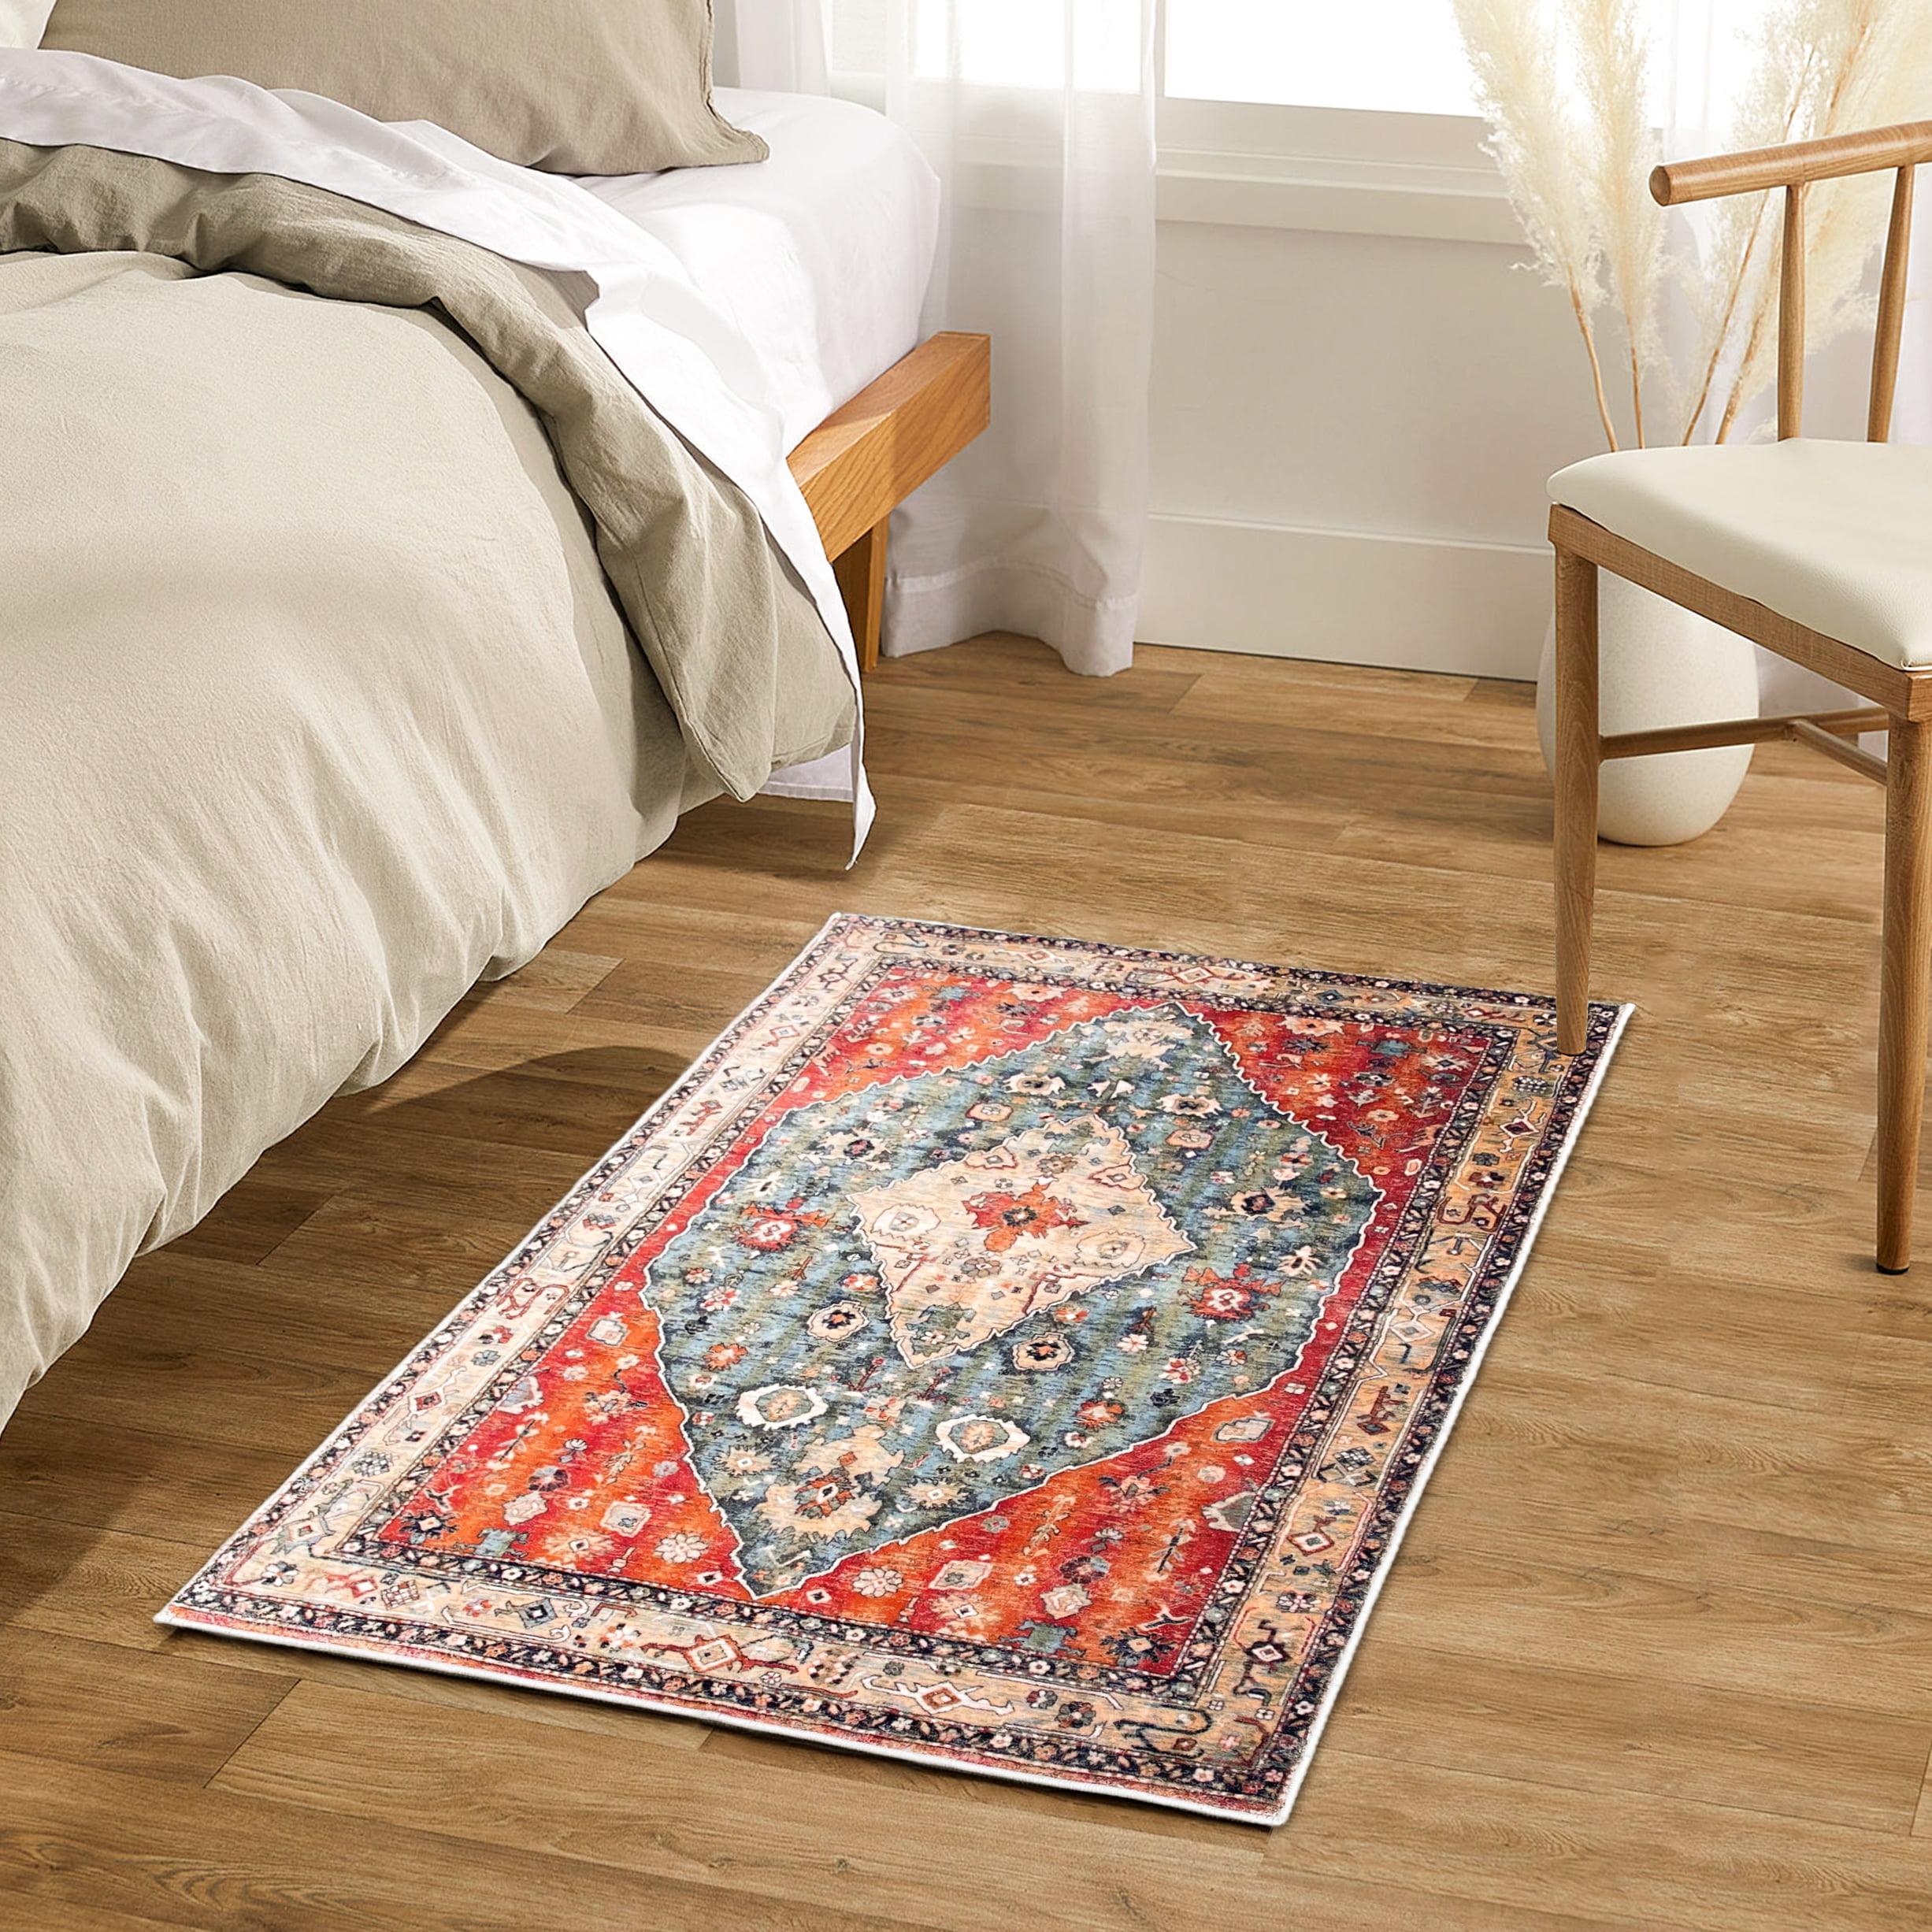 New Cozy Vintage-Looking Entryway Rug - The Little by Little Home